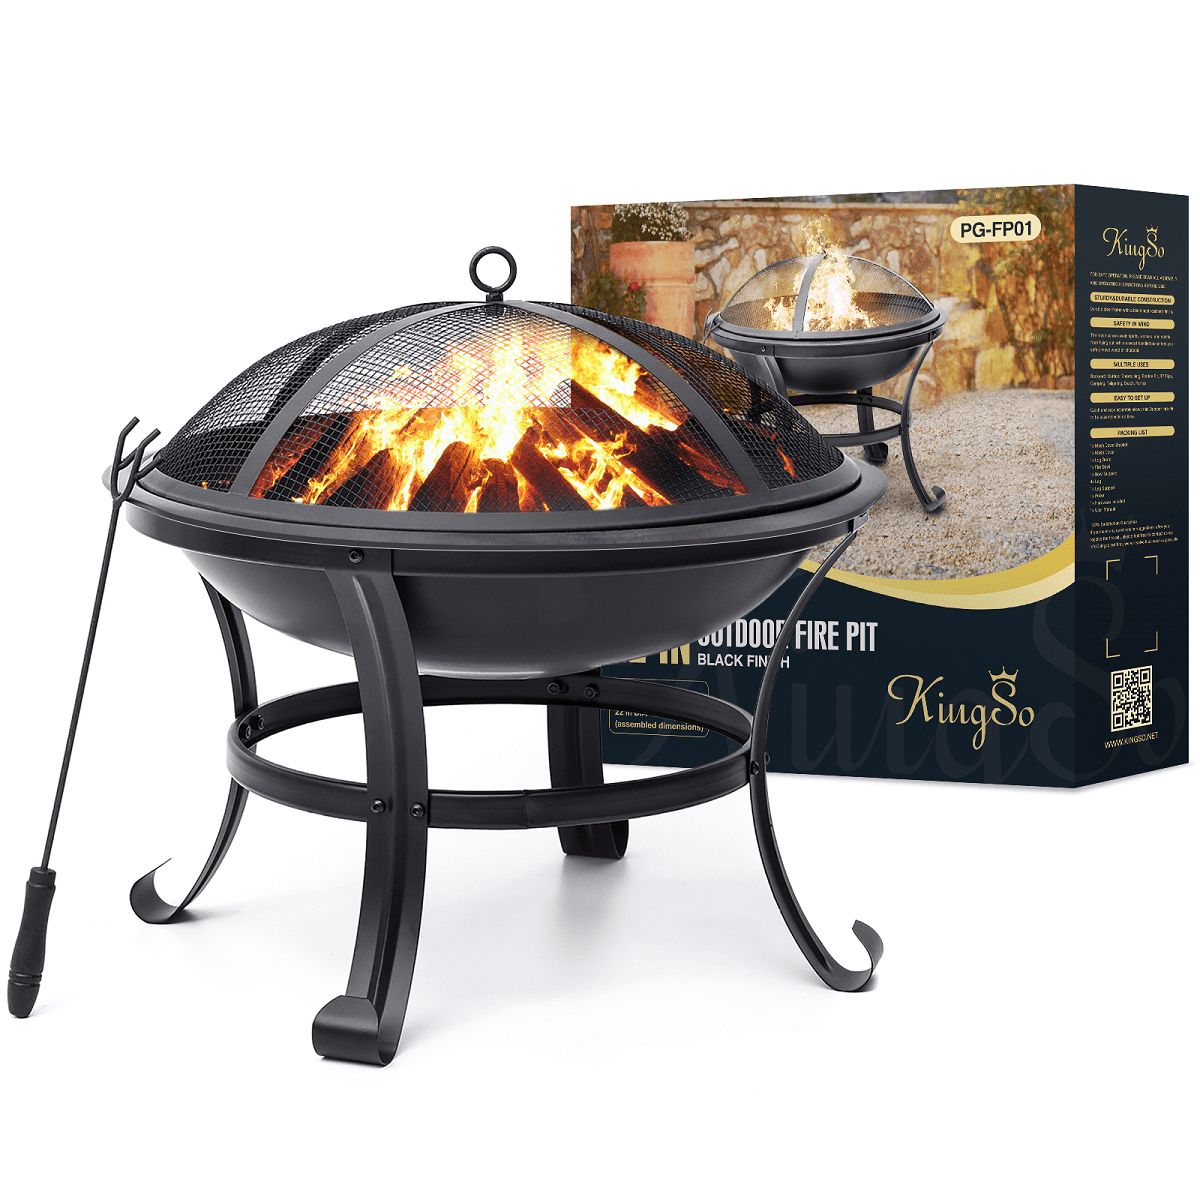 Kingso 22 Wood Burning Fire Pit For, 32 Inch Round Metal Fire Pit Lid